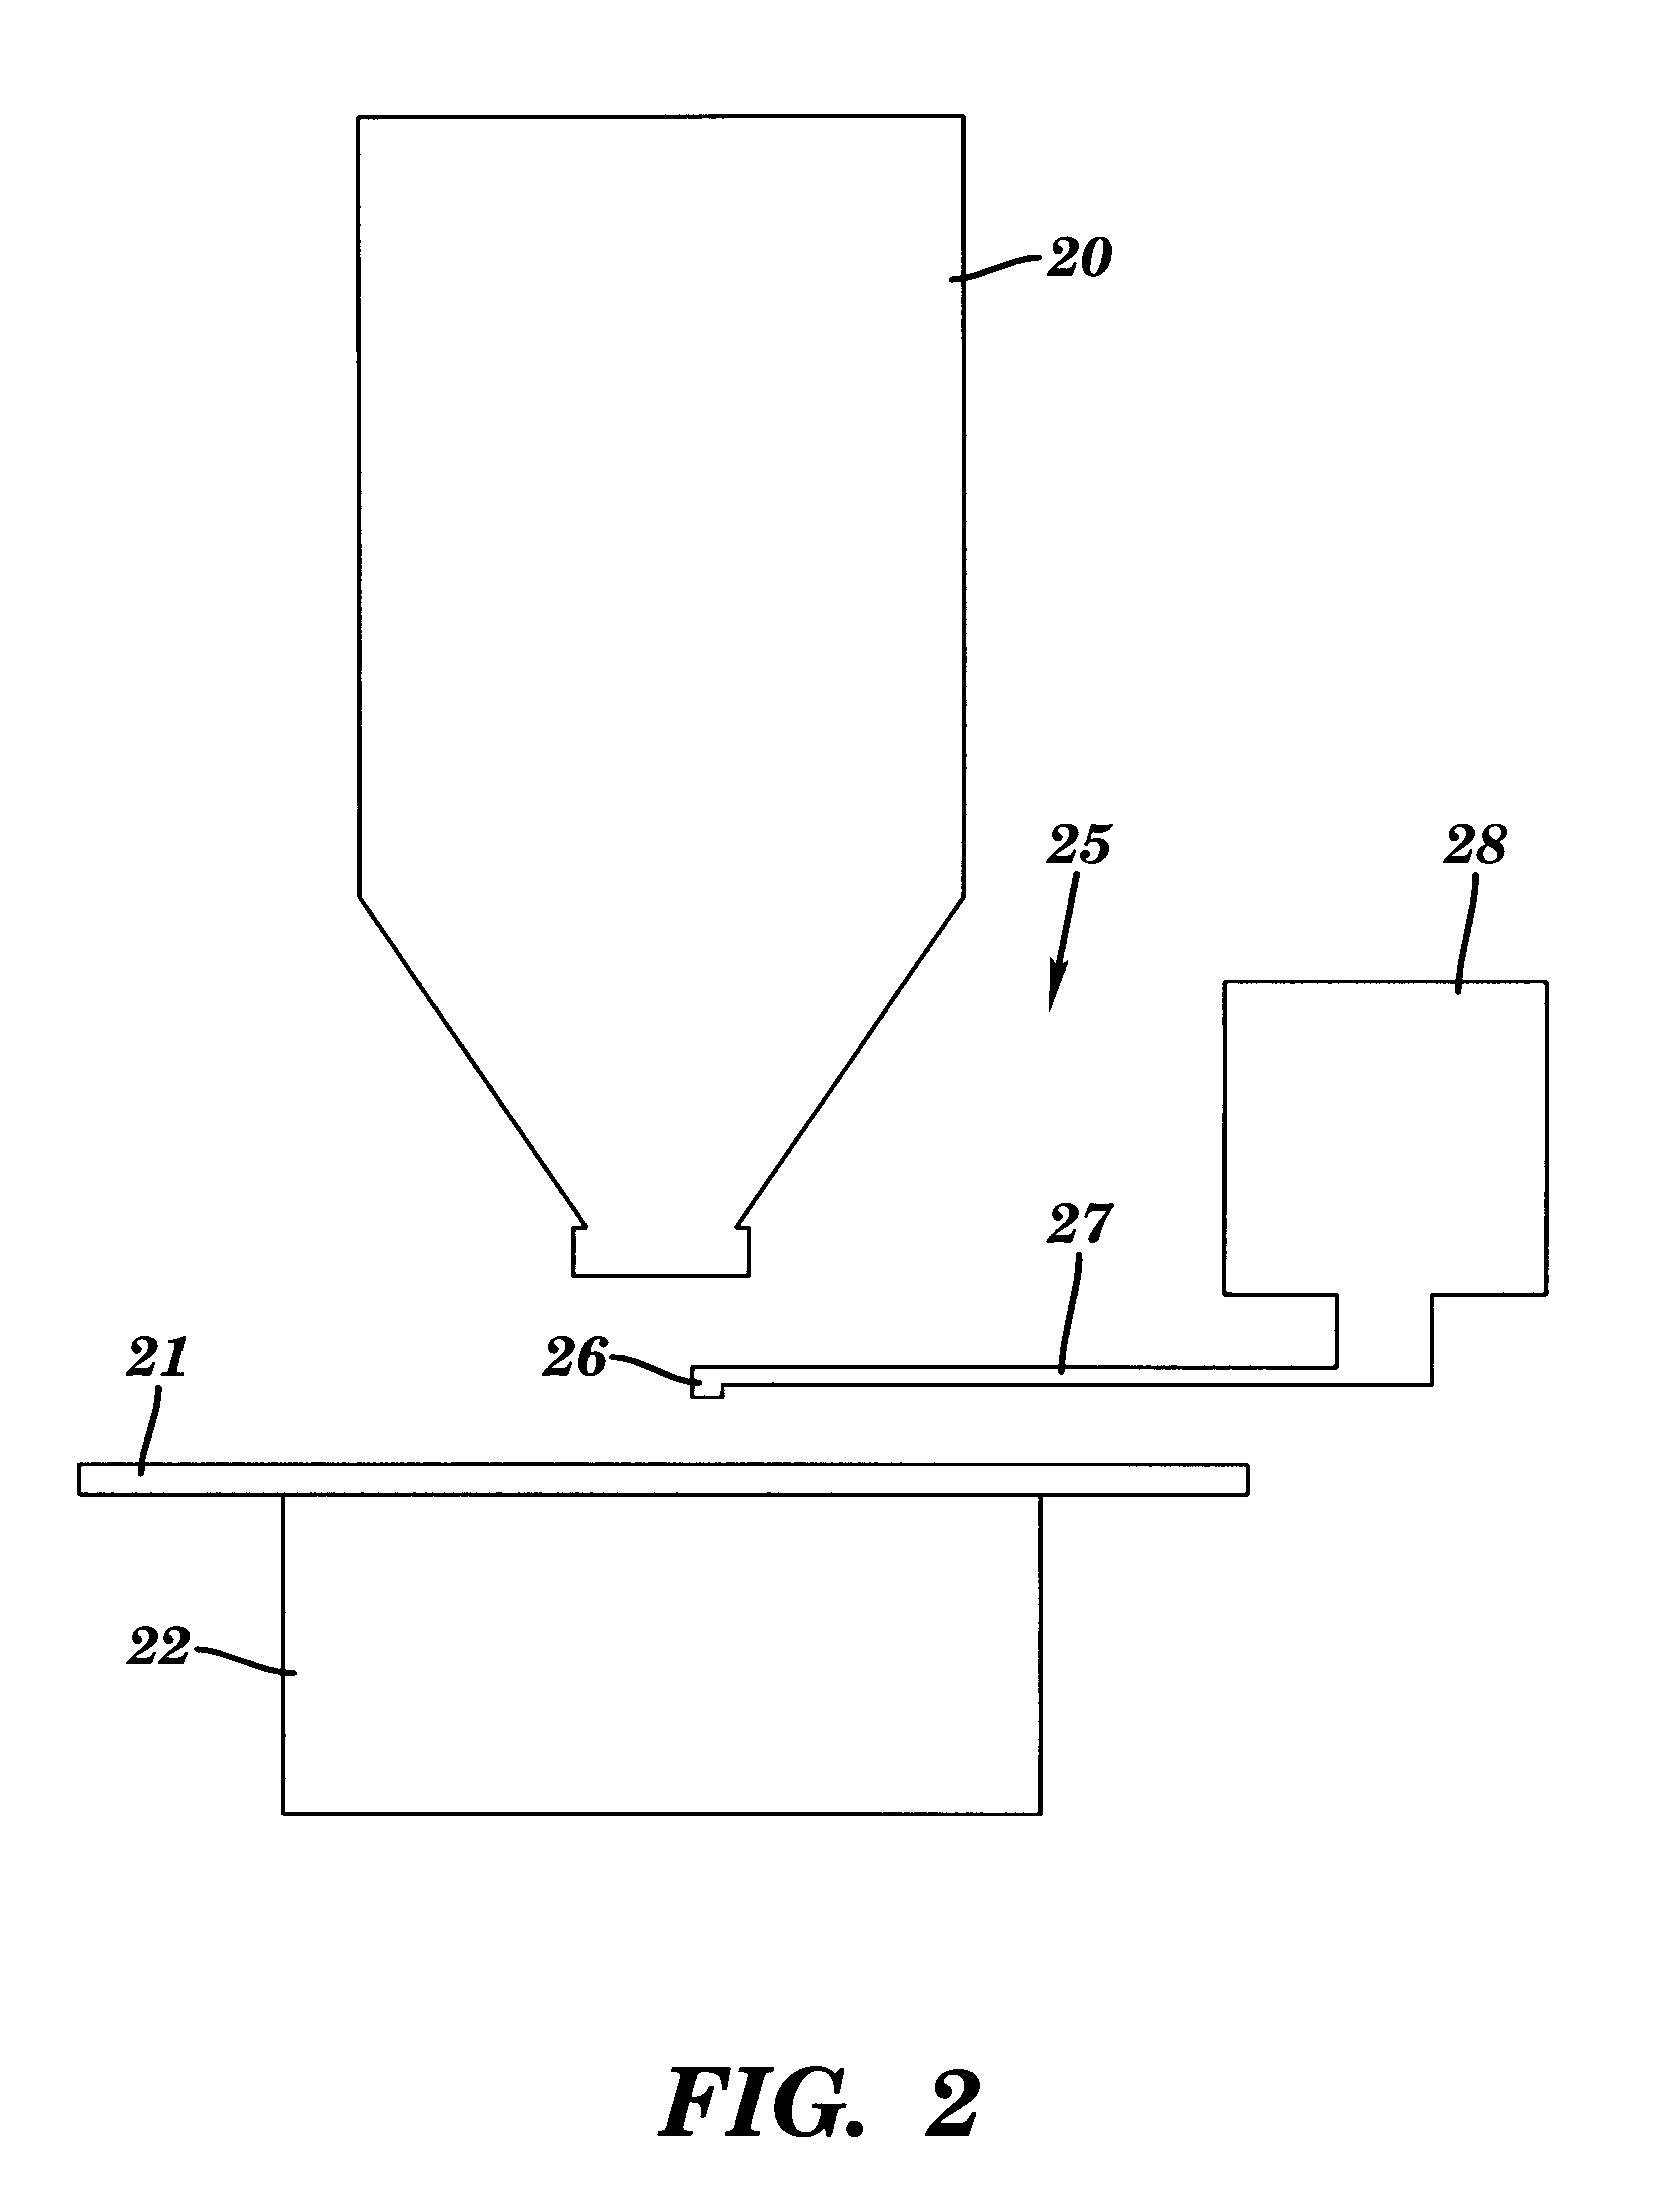 High-resolution optical channel for non-destructive navigation and processing of integrated circuits